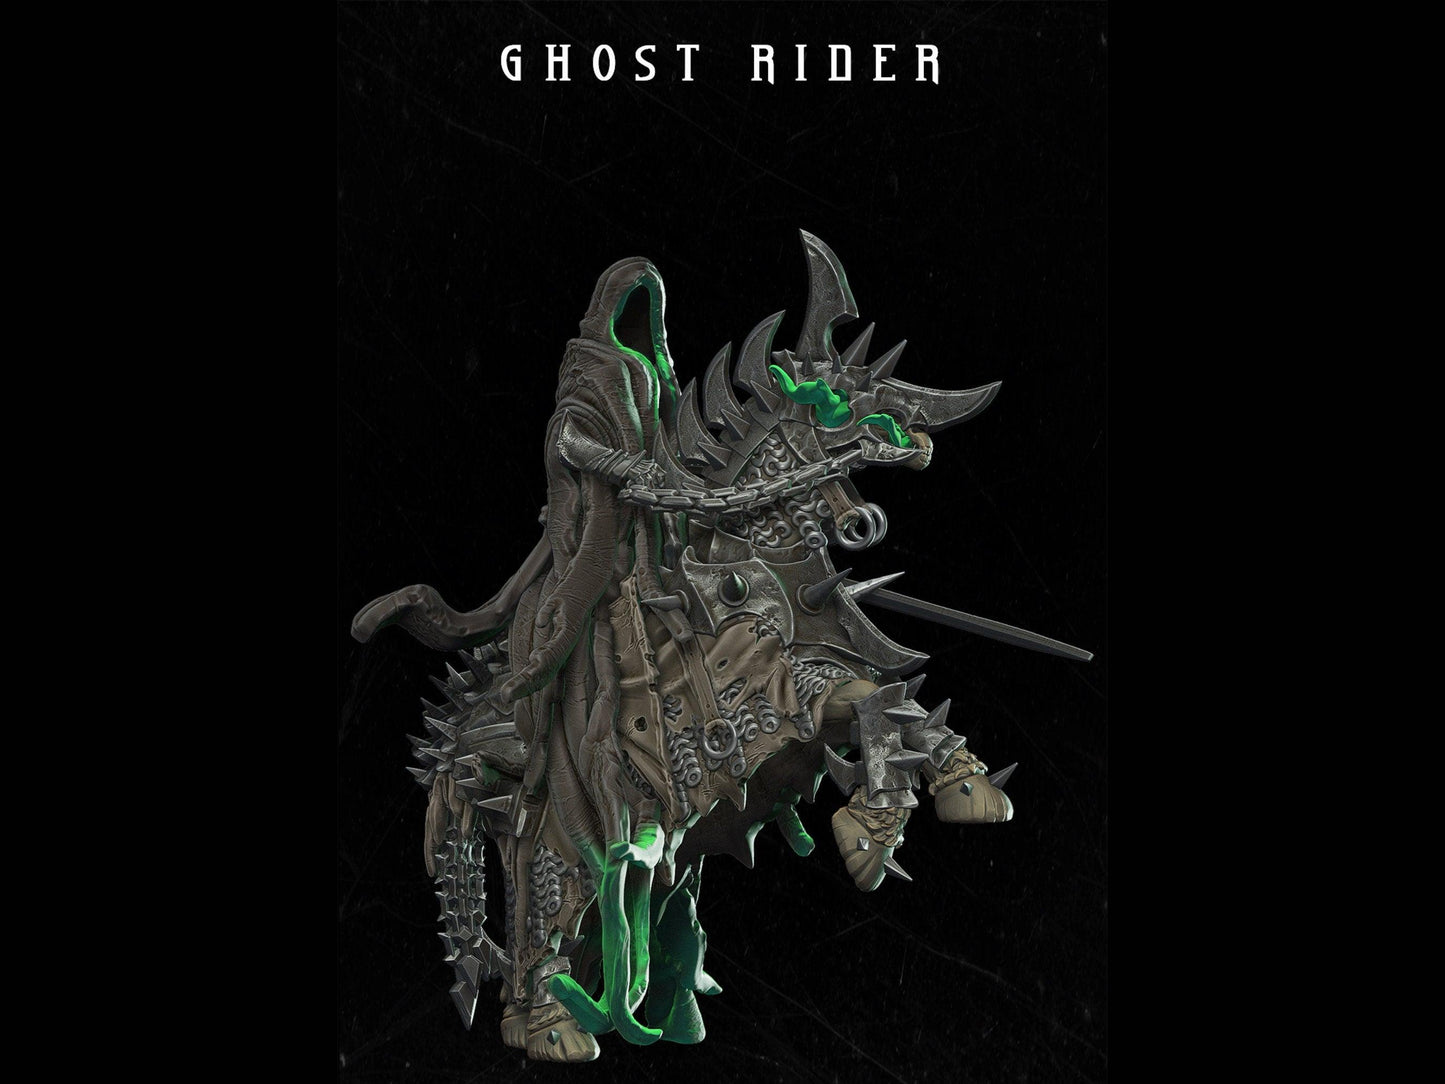 Ghost Rider Miniature ghoul miniature 28mm scale Tabletop gaming DnD Miniature Dungeons and Dragons dnd 5e dungeon master gift - Plague Miniatures shop for DnD Miniatures